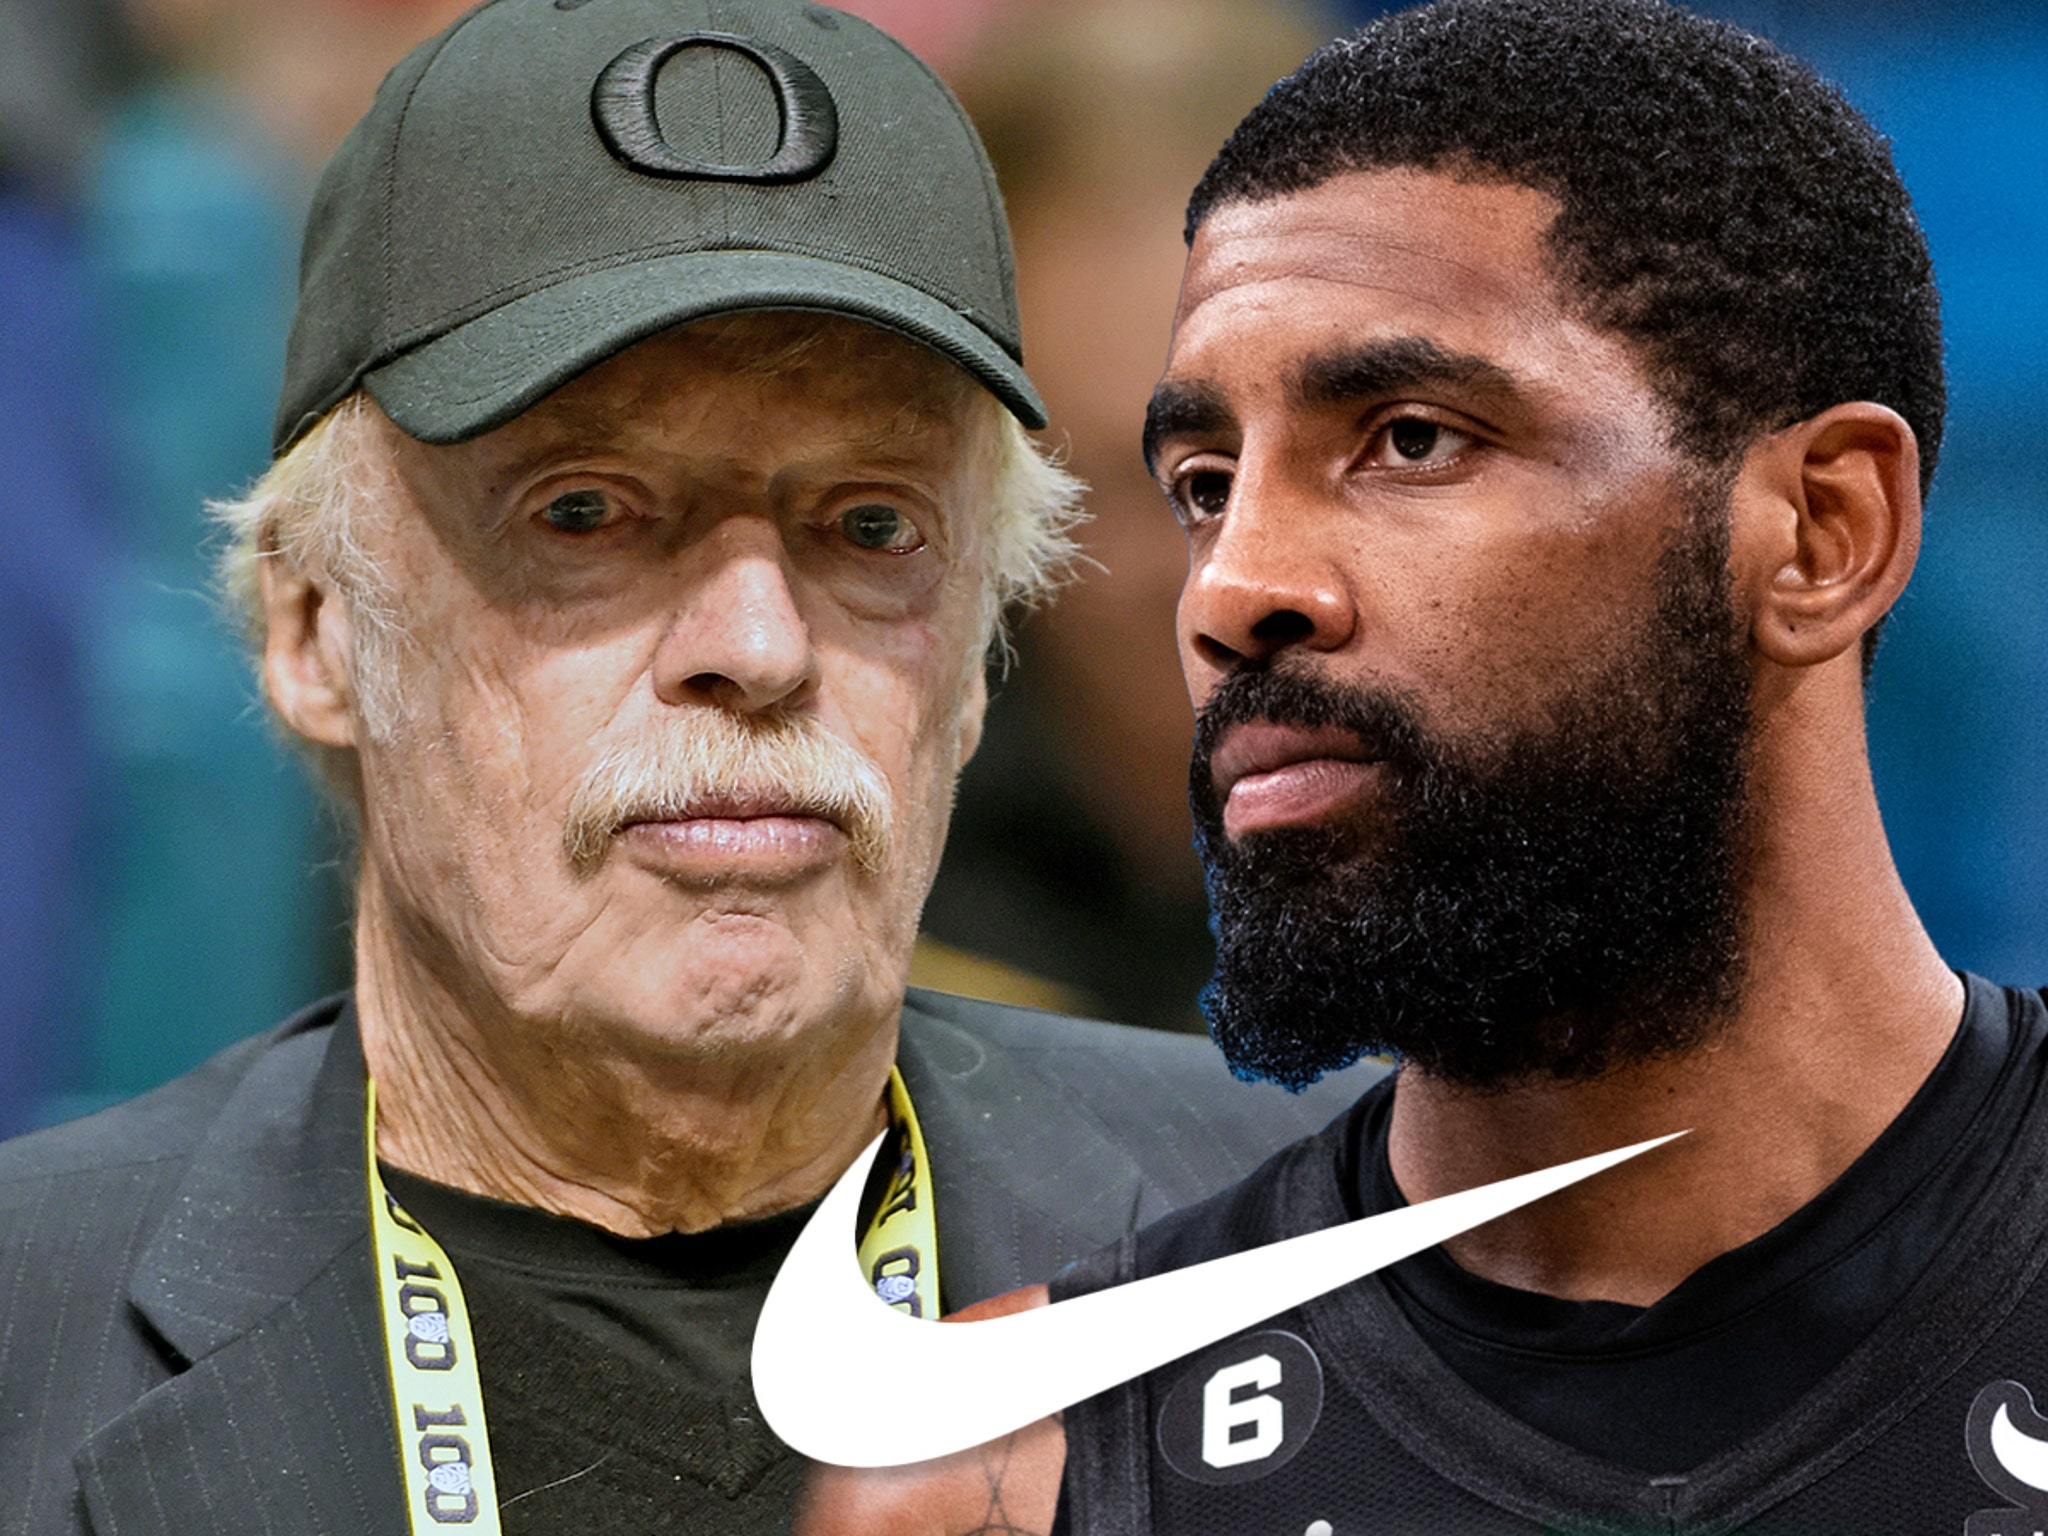 Says Kyrie Irving's Relationship With Nike